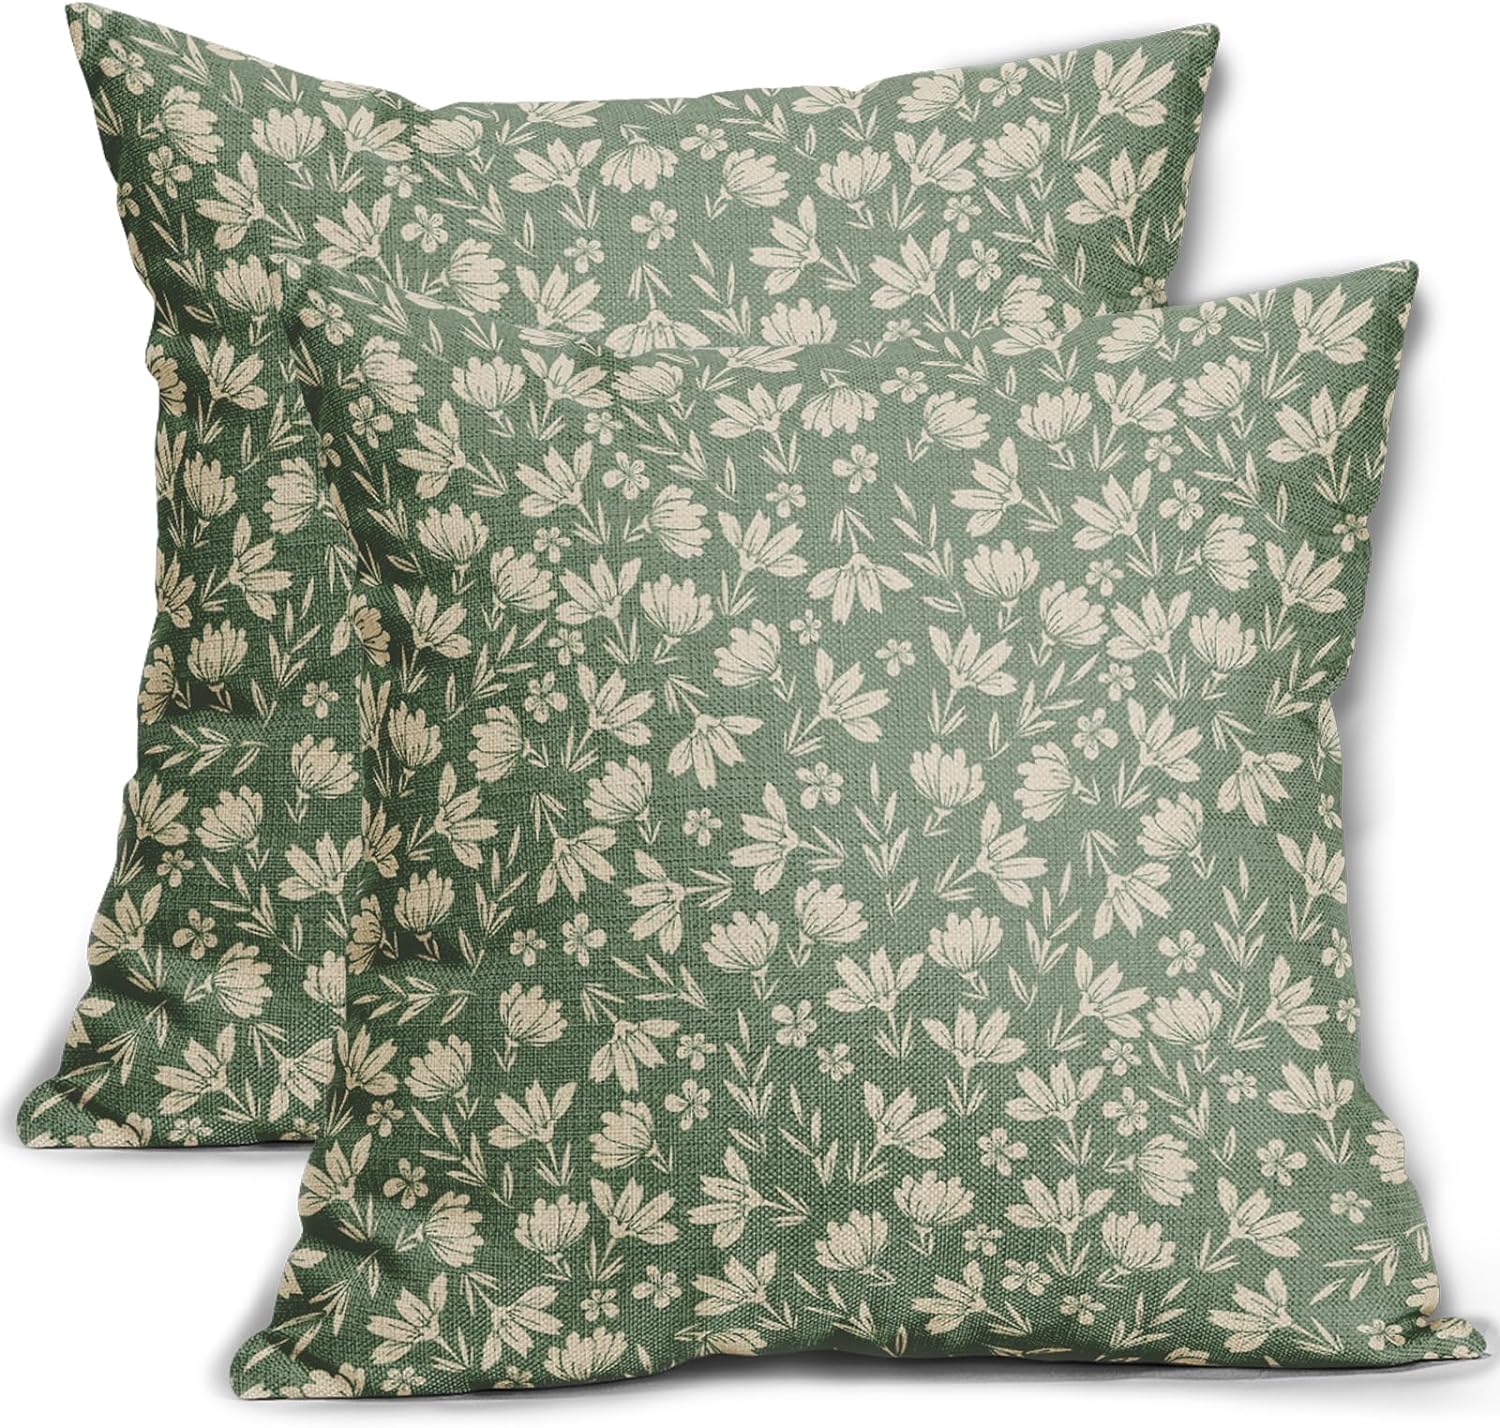 Aytipun Spring Sage Green Pillow Covers 18x18 Set of 2 Vintage Floral Rustic Old Style Cute Flower Print Decorative Outdoor Pillowcases Seasonal Farmhouse Throw Cushion Case Decor for Couch Sofa Bed